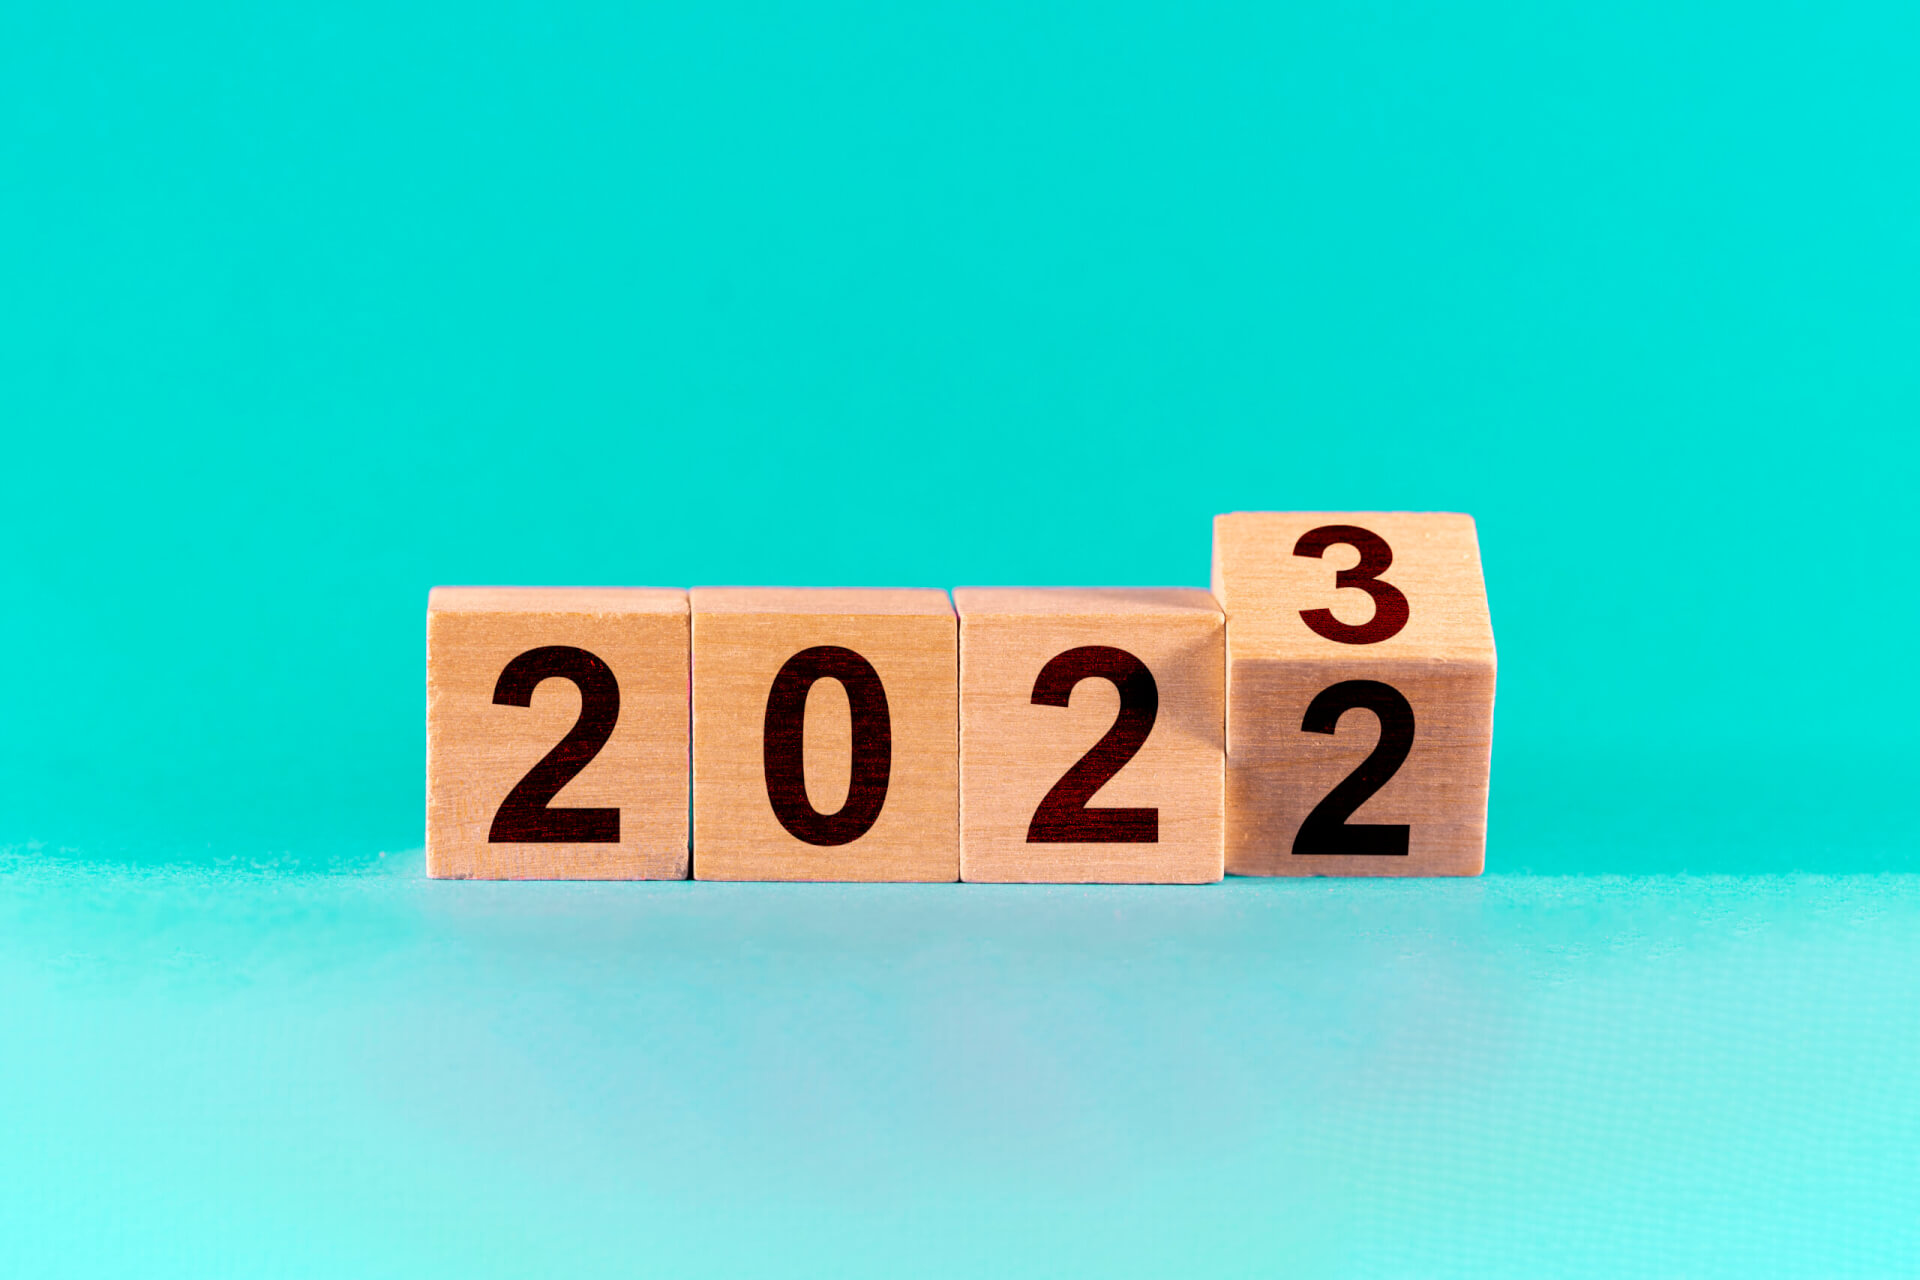 Concept of the end of 2022 and the new beginning in 2023. Change from 2022 to 2023 in wooden cubes on a green background.